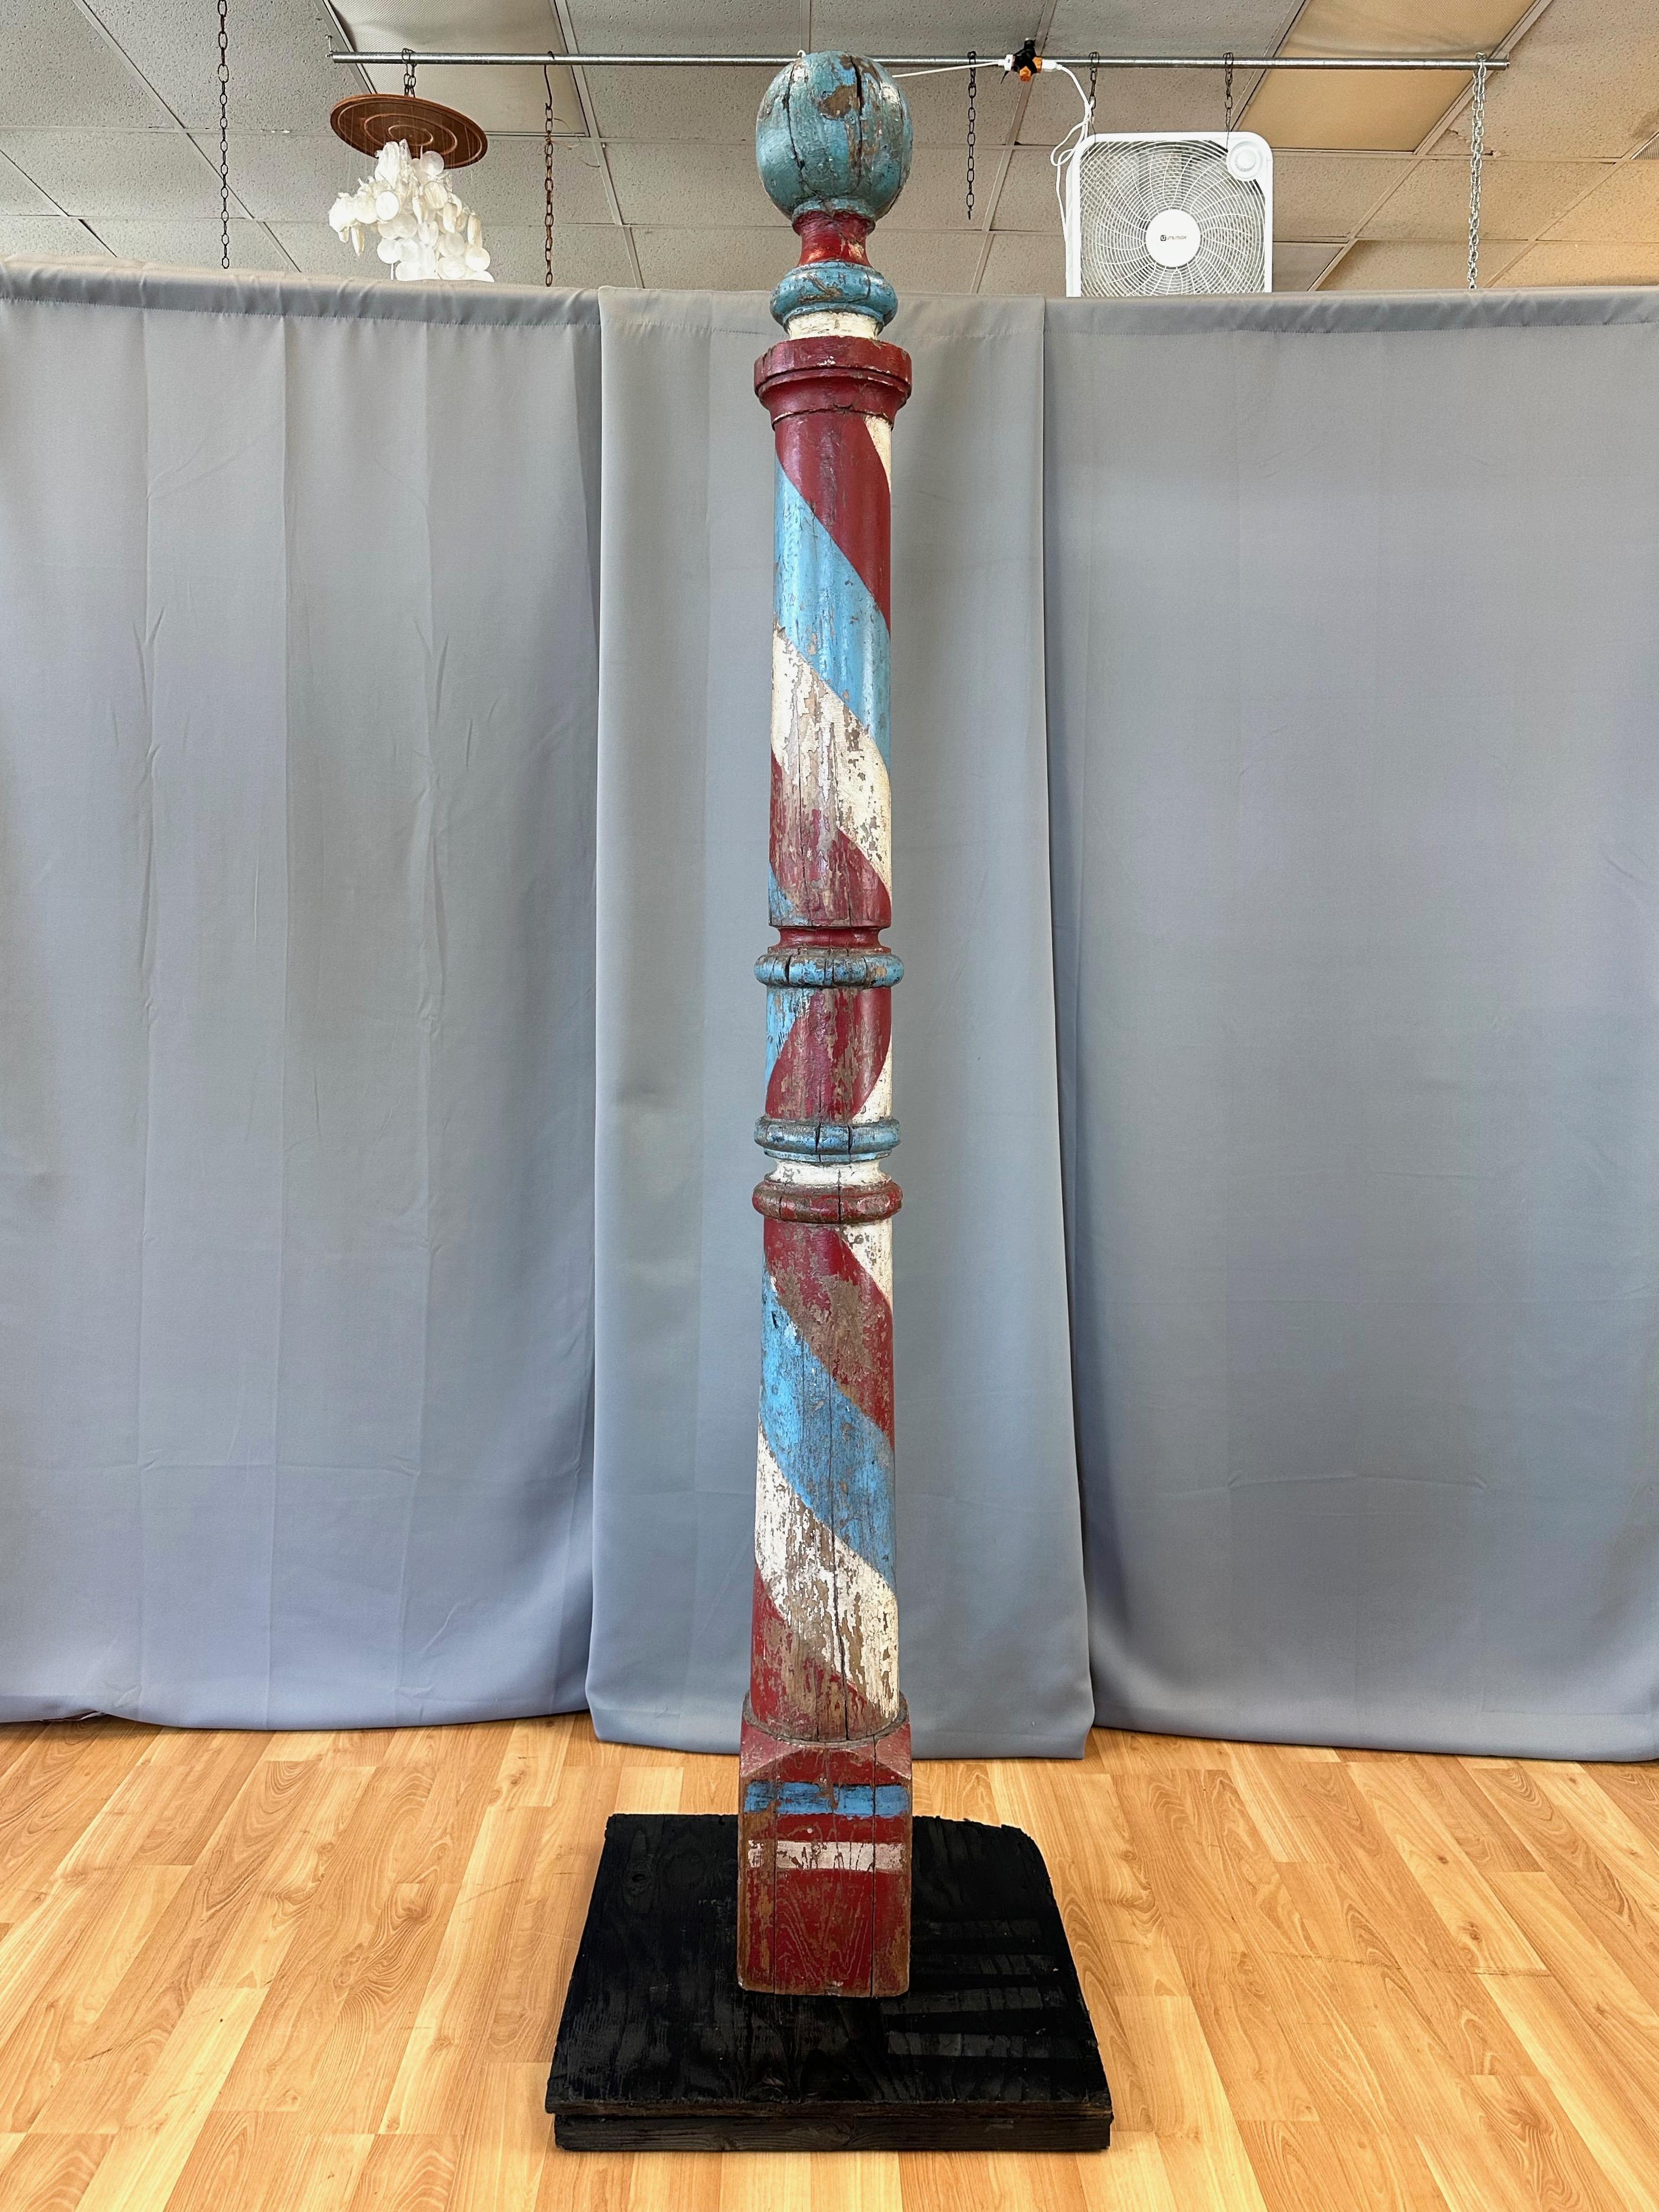 An uncommon and towering seven-and-a-half-foot tall circa 1875 American painted turned wood barber pole trade sign.

Very impressive in both its rarely seen size and hand-crafted execution, with its turned wood form featuring a ball top and